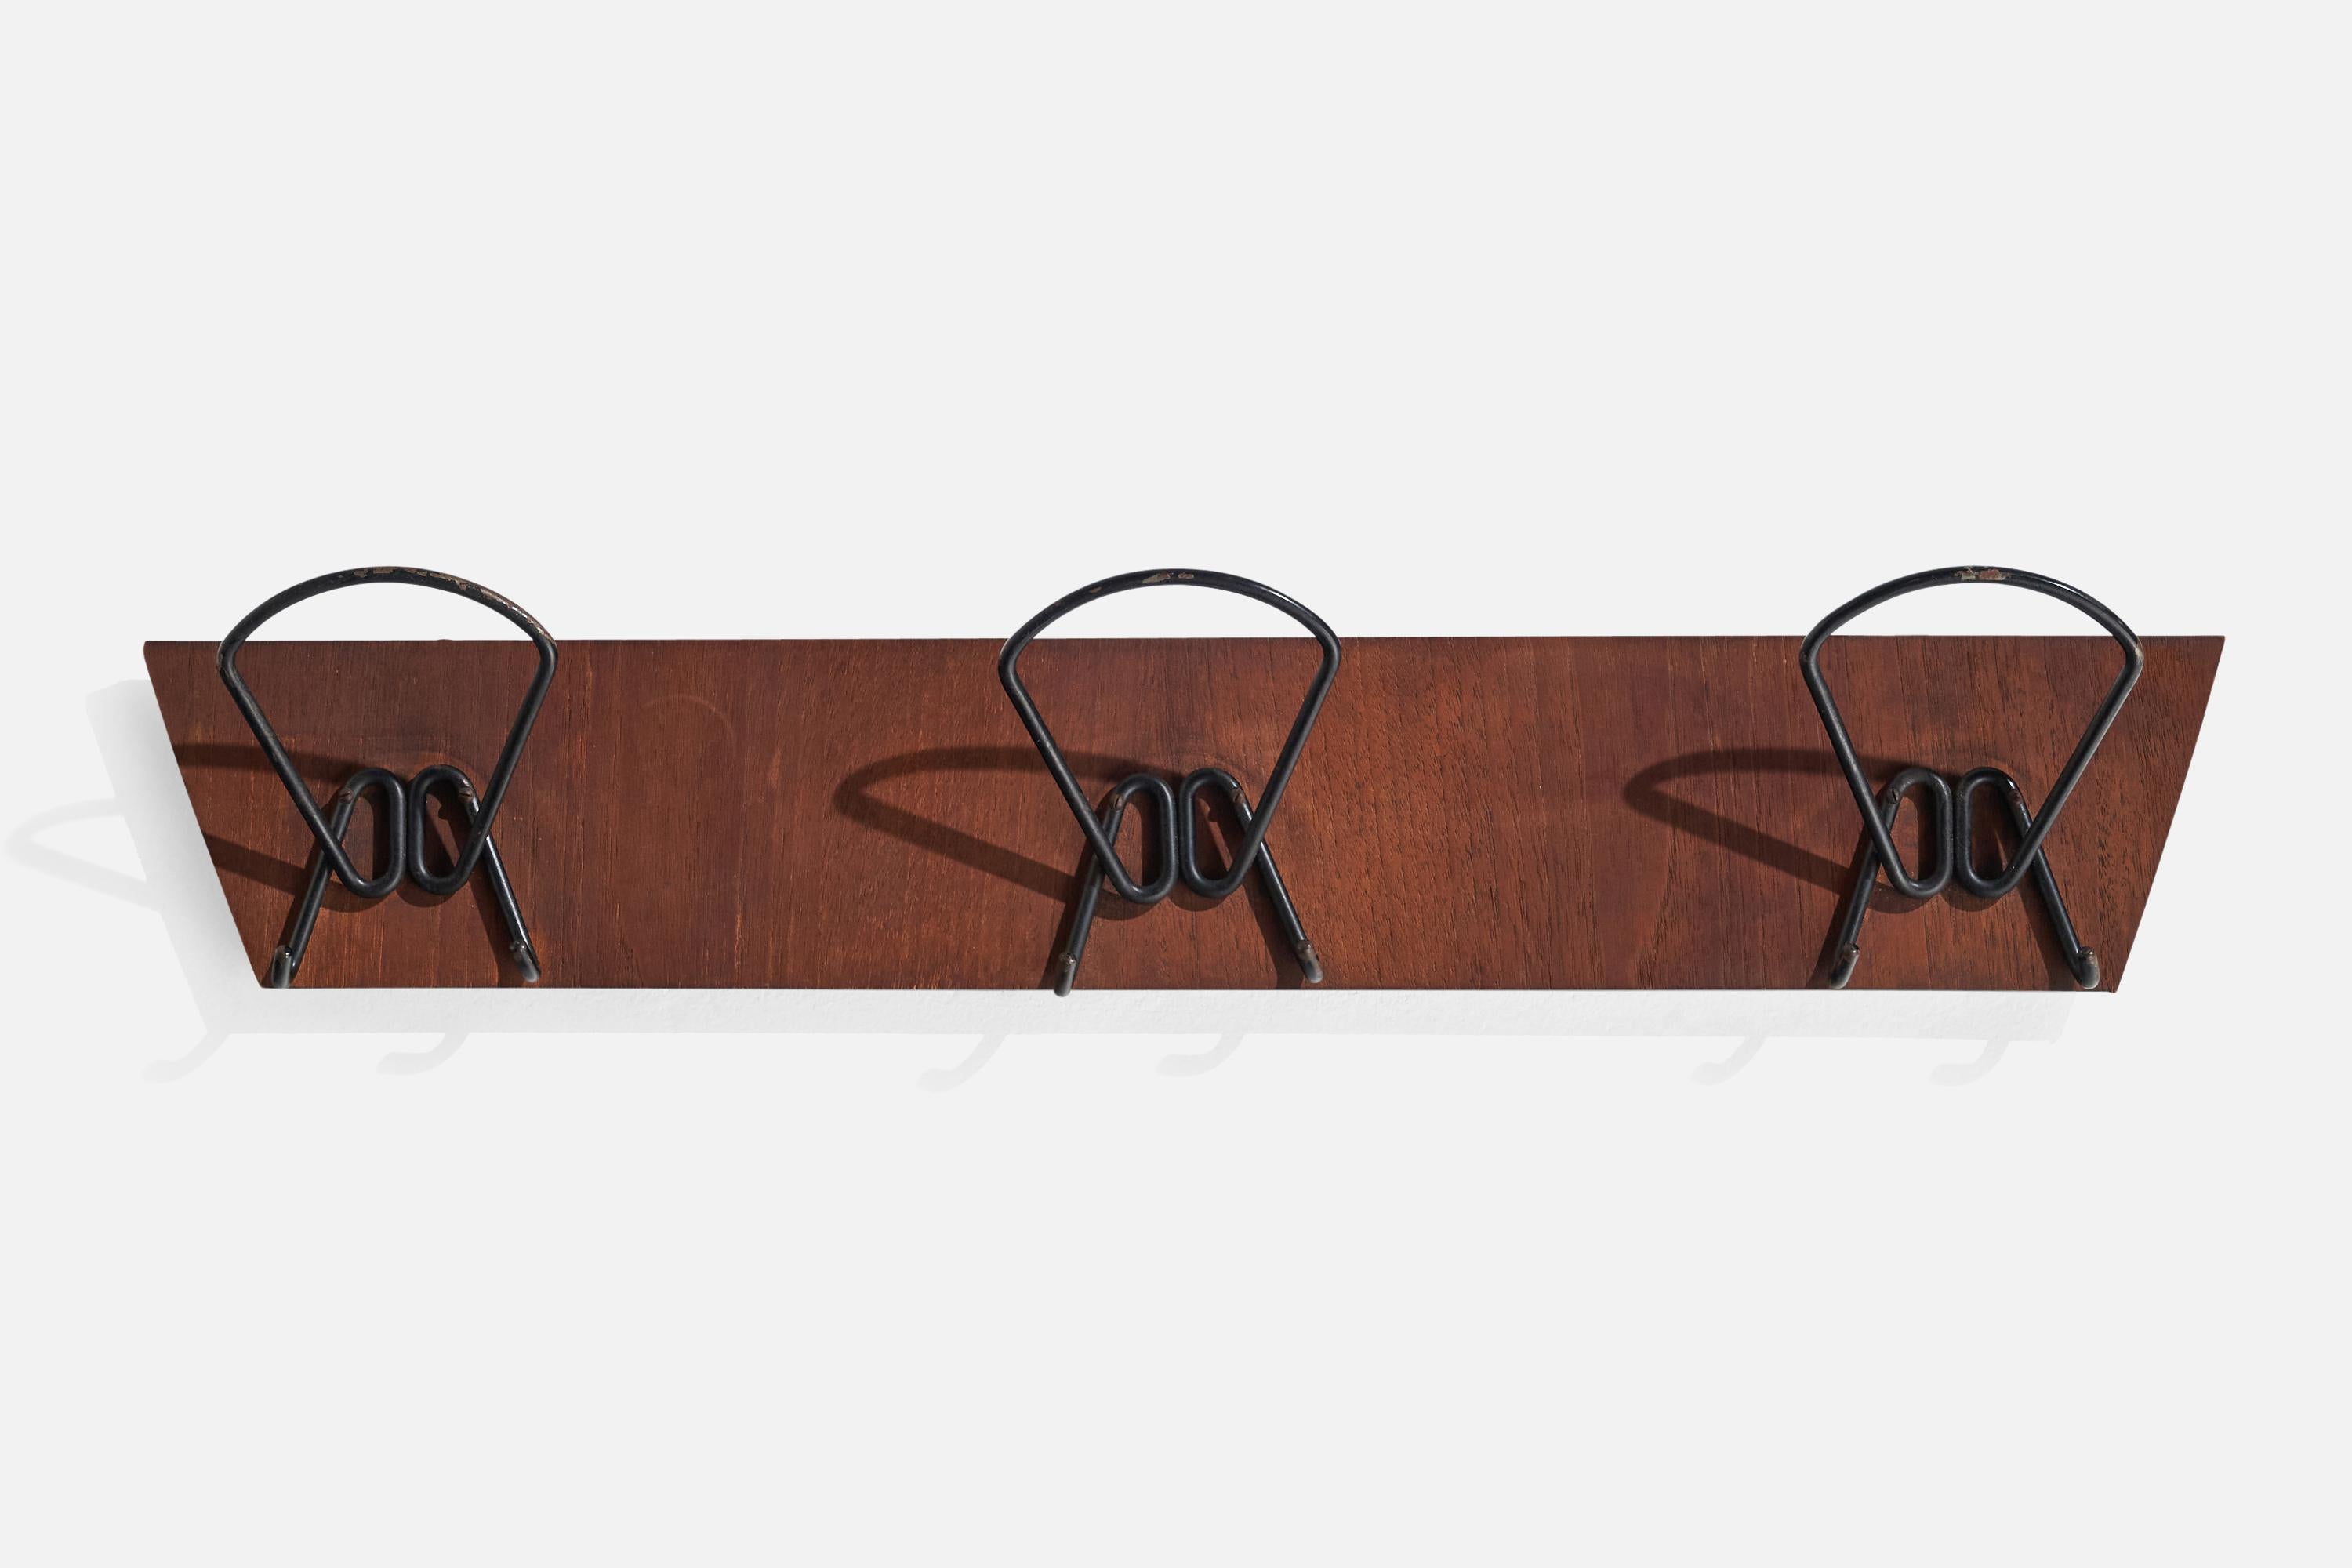 A teak and black-lacquered metal coat rack designed and produced in Italy, 1940s.